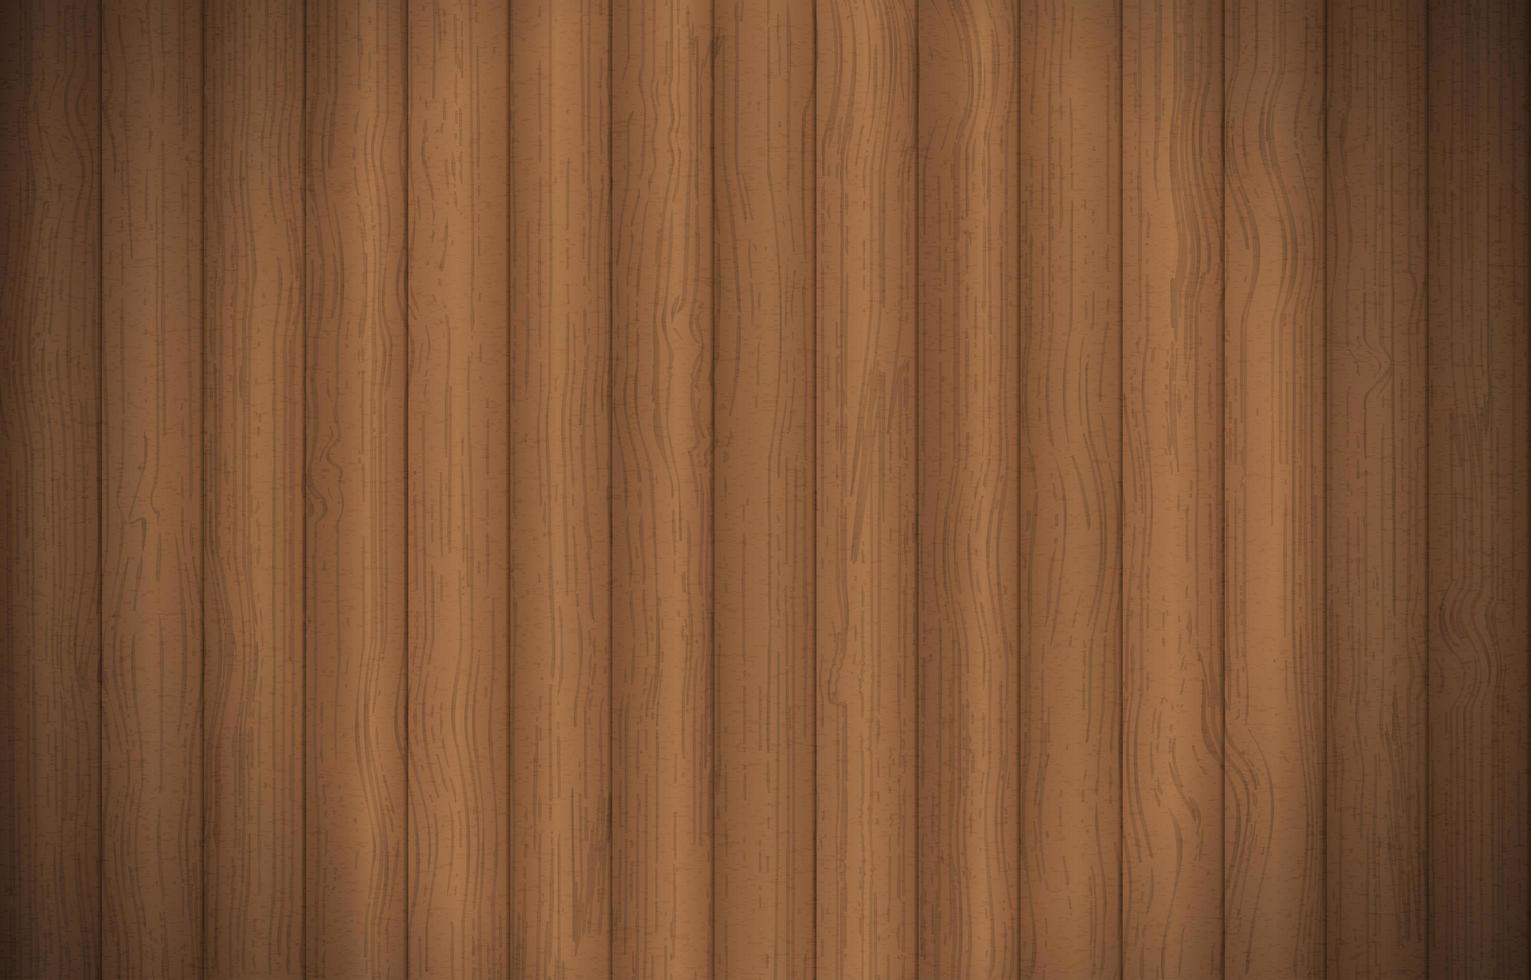 Wood Texture Plank Material Background vector